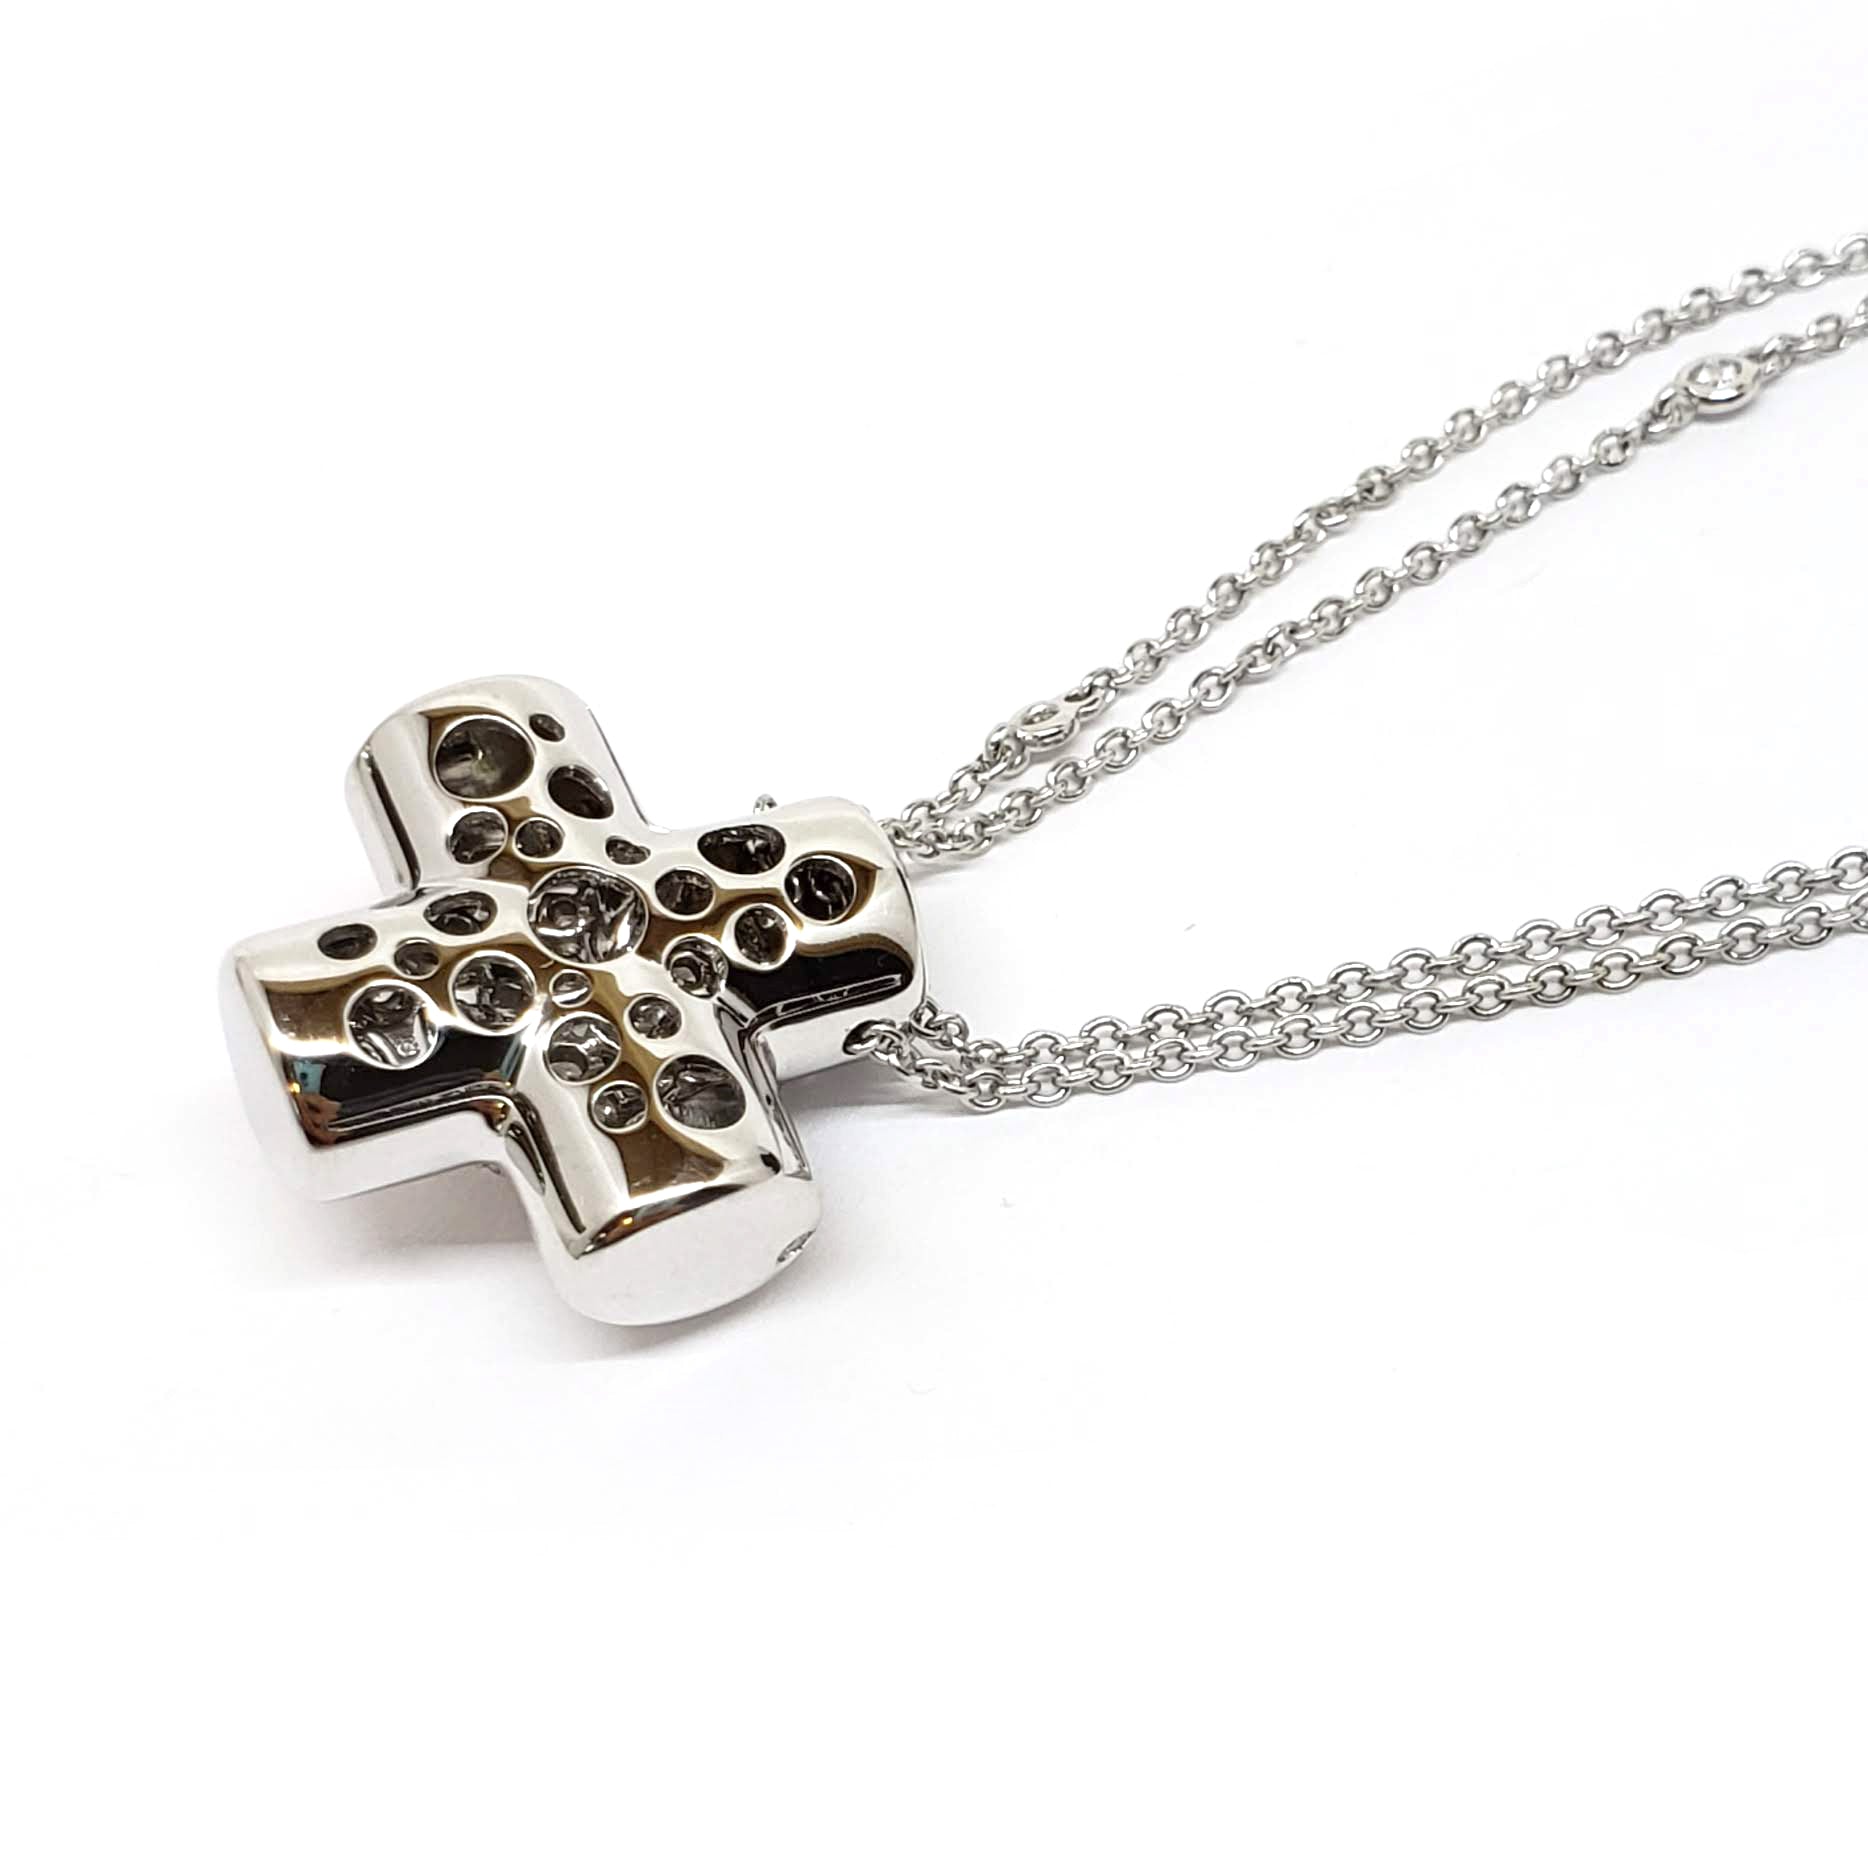 Damiani Paradise Collection Cross Pendant With 18k White Gold And Diamonds